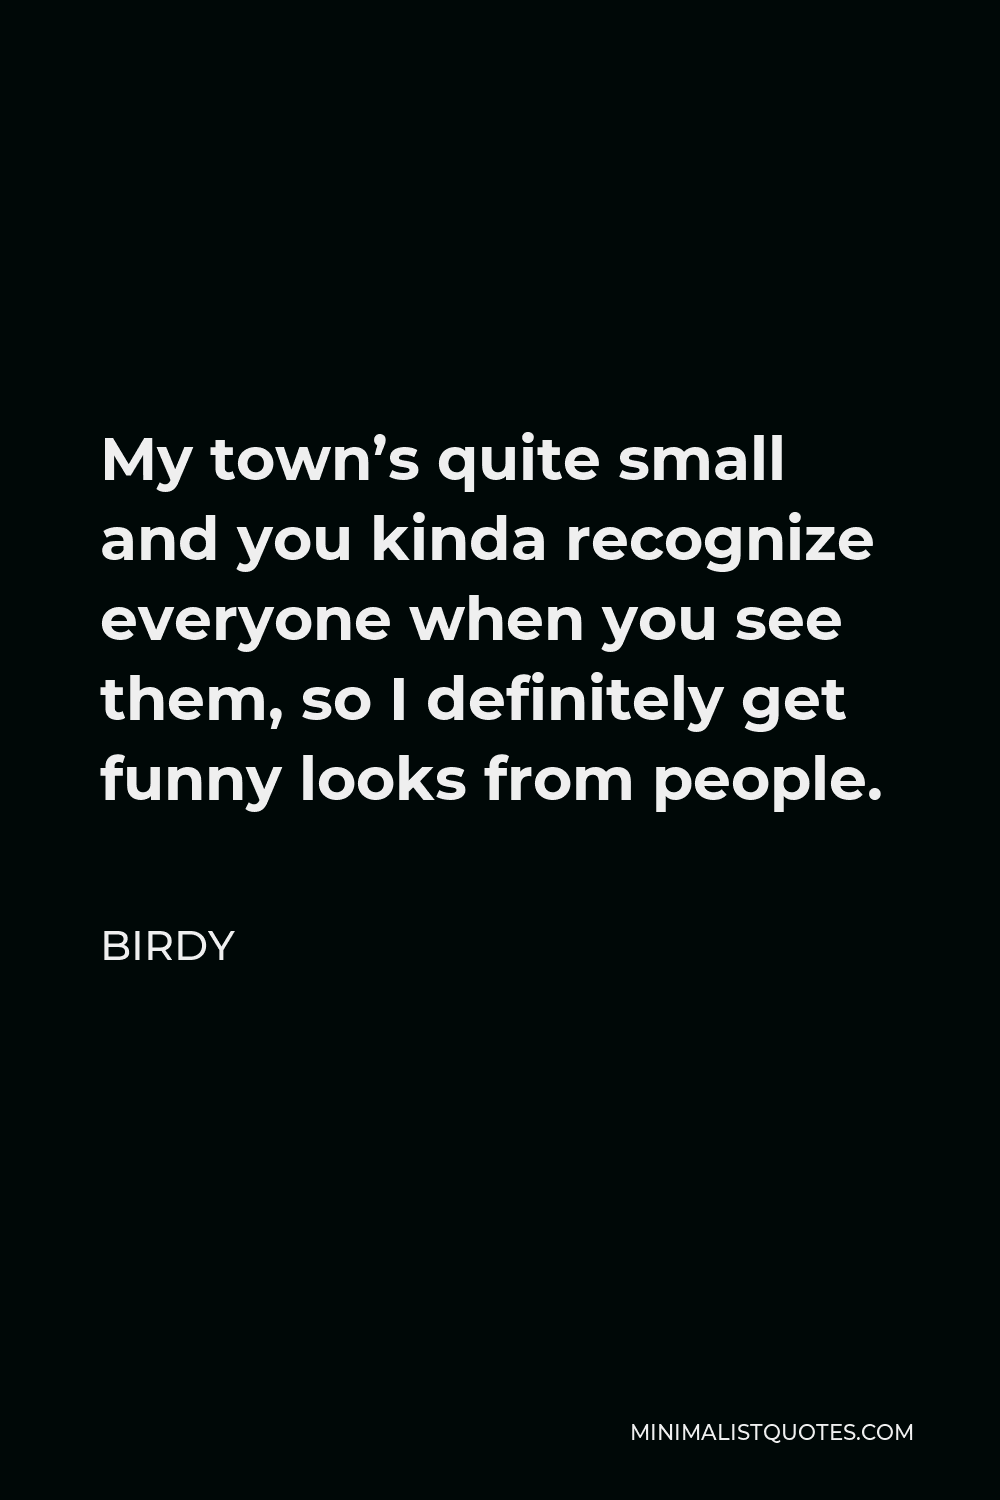 Birdy Quote - My town’s quite small and you kinda recognize everyone when you see them, so I definitely get funny looks from people.